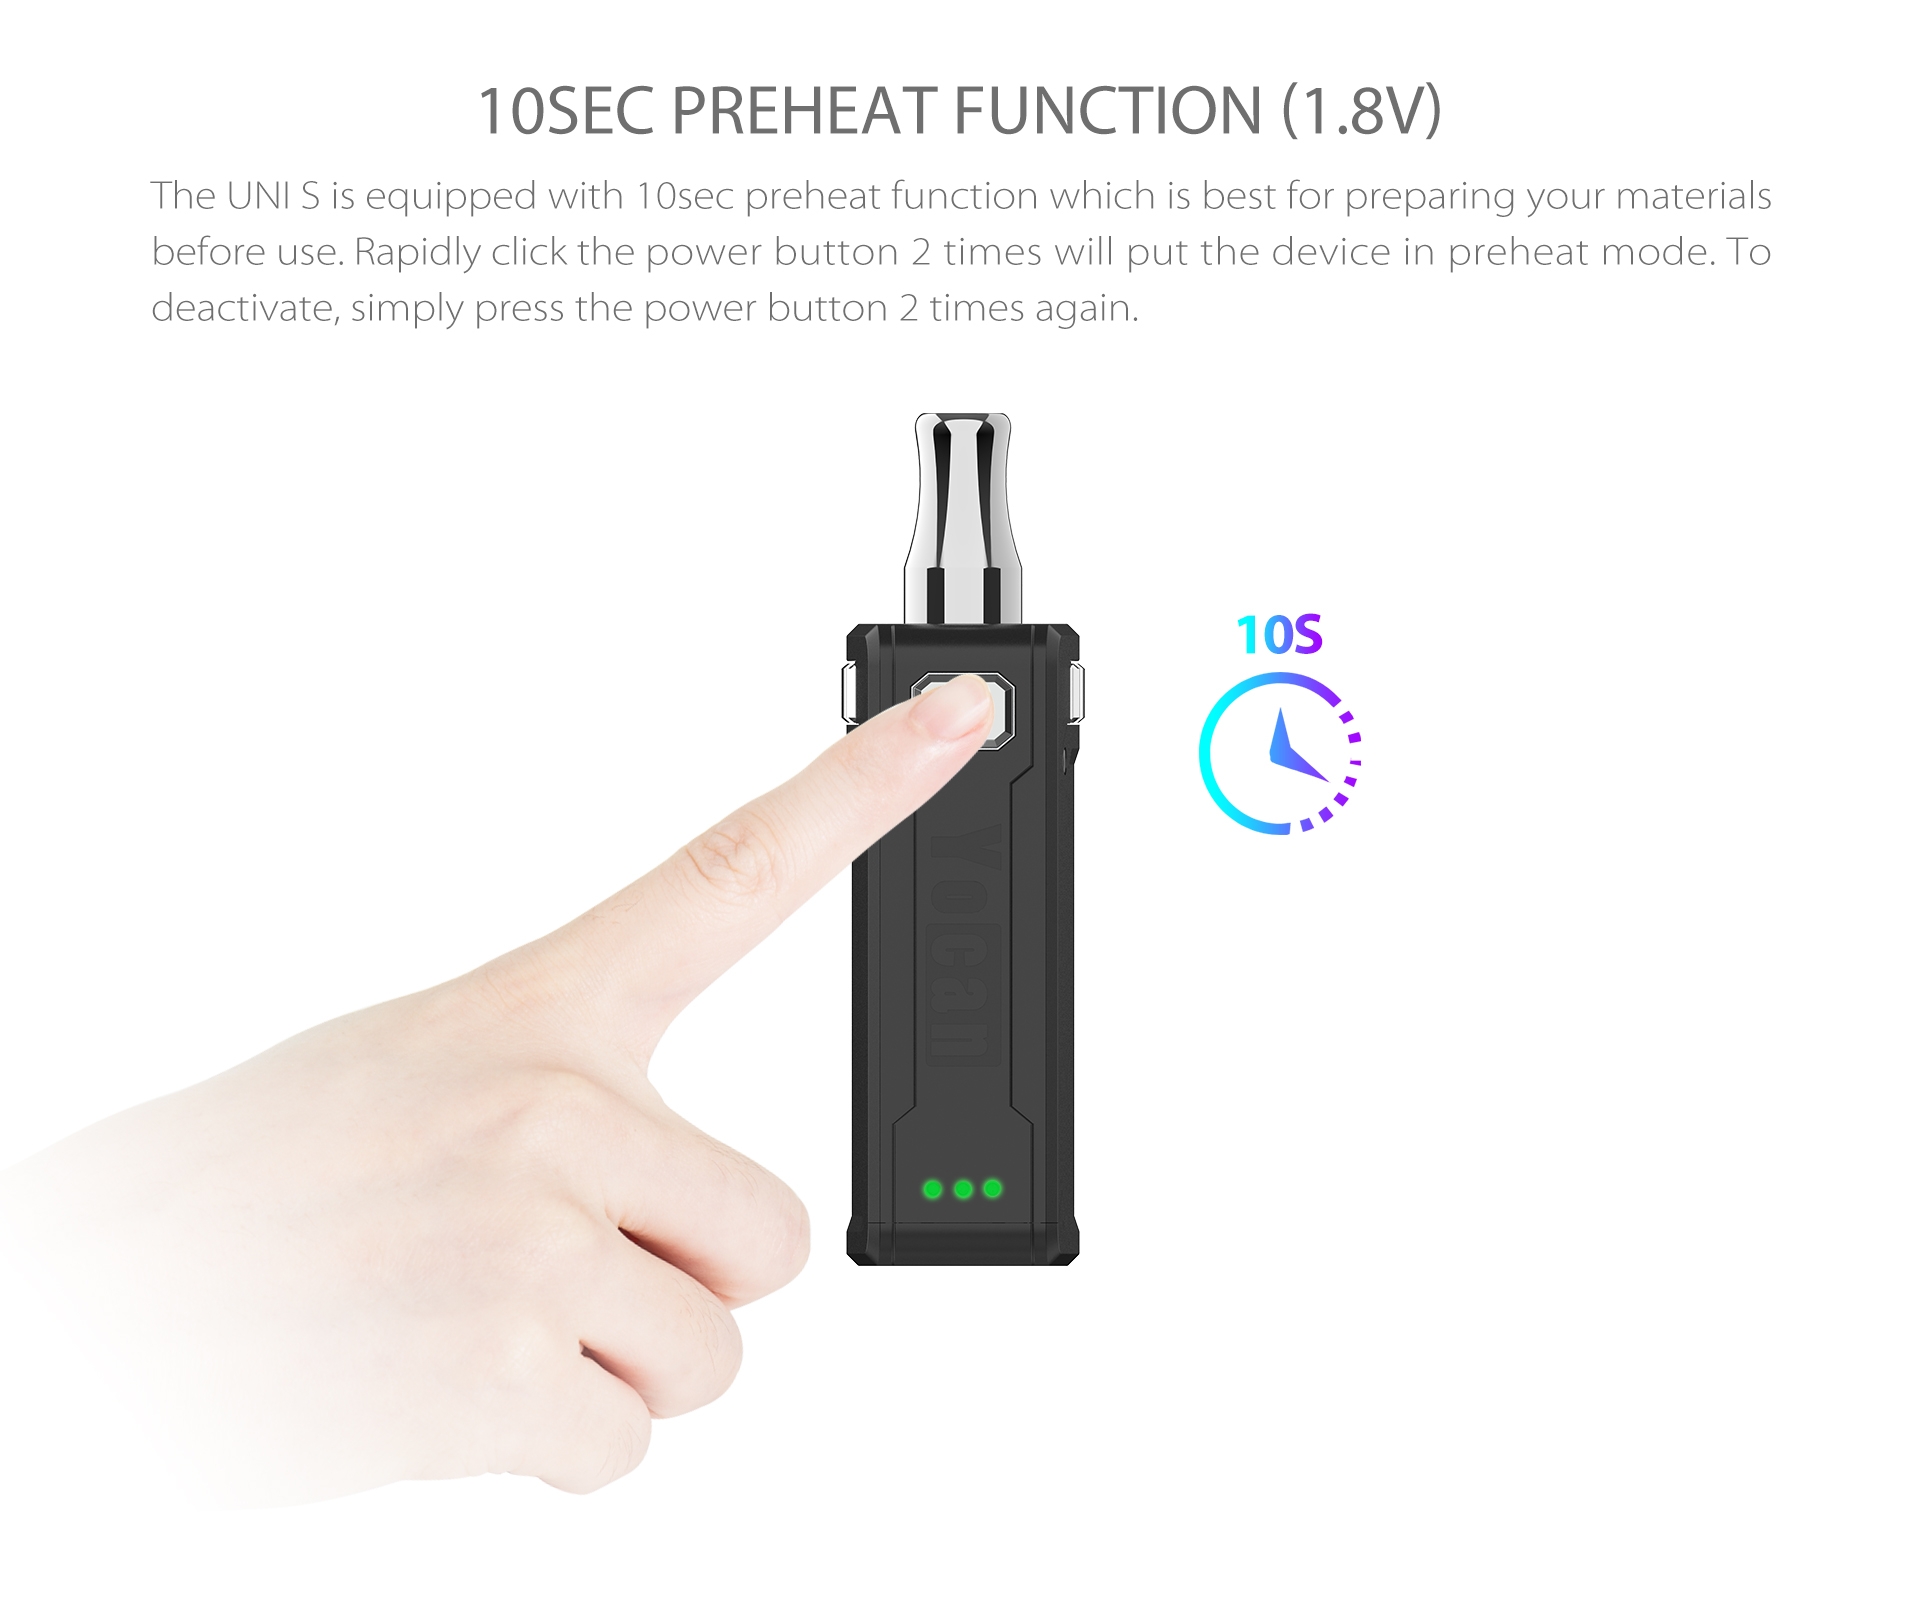 Yocan UNI S Box Mod is equipped with 10sec preheat function